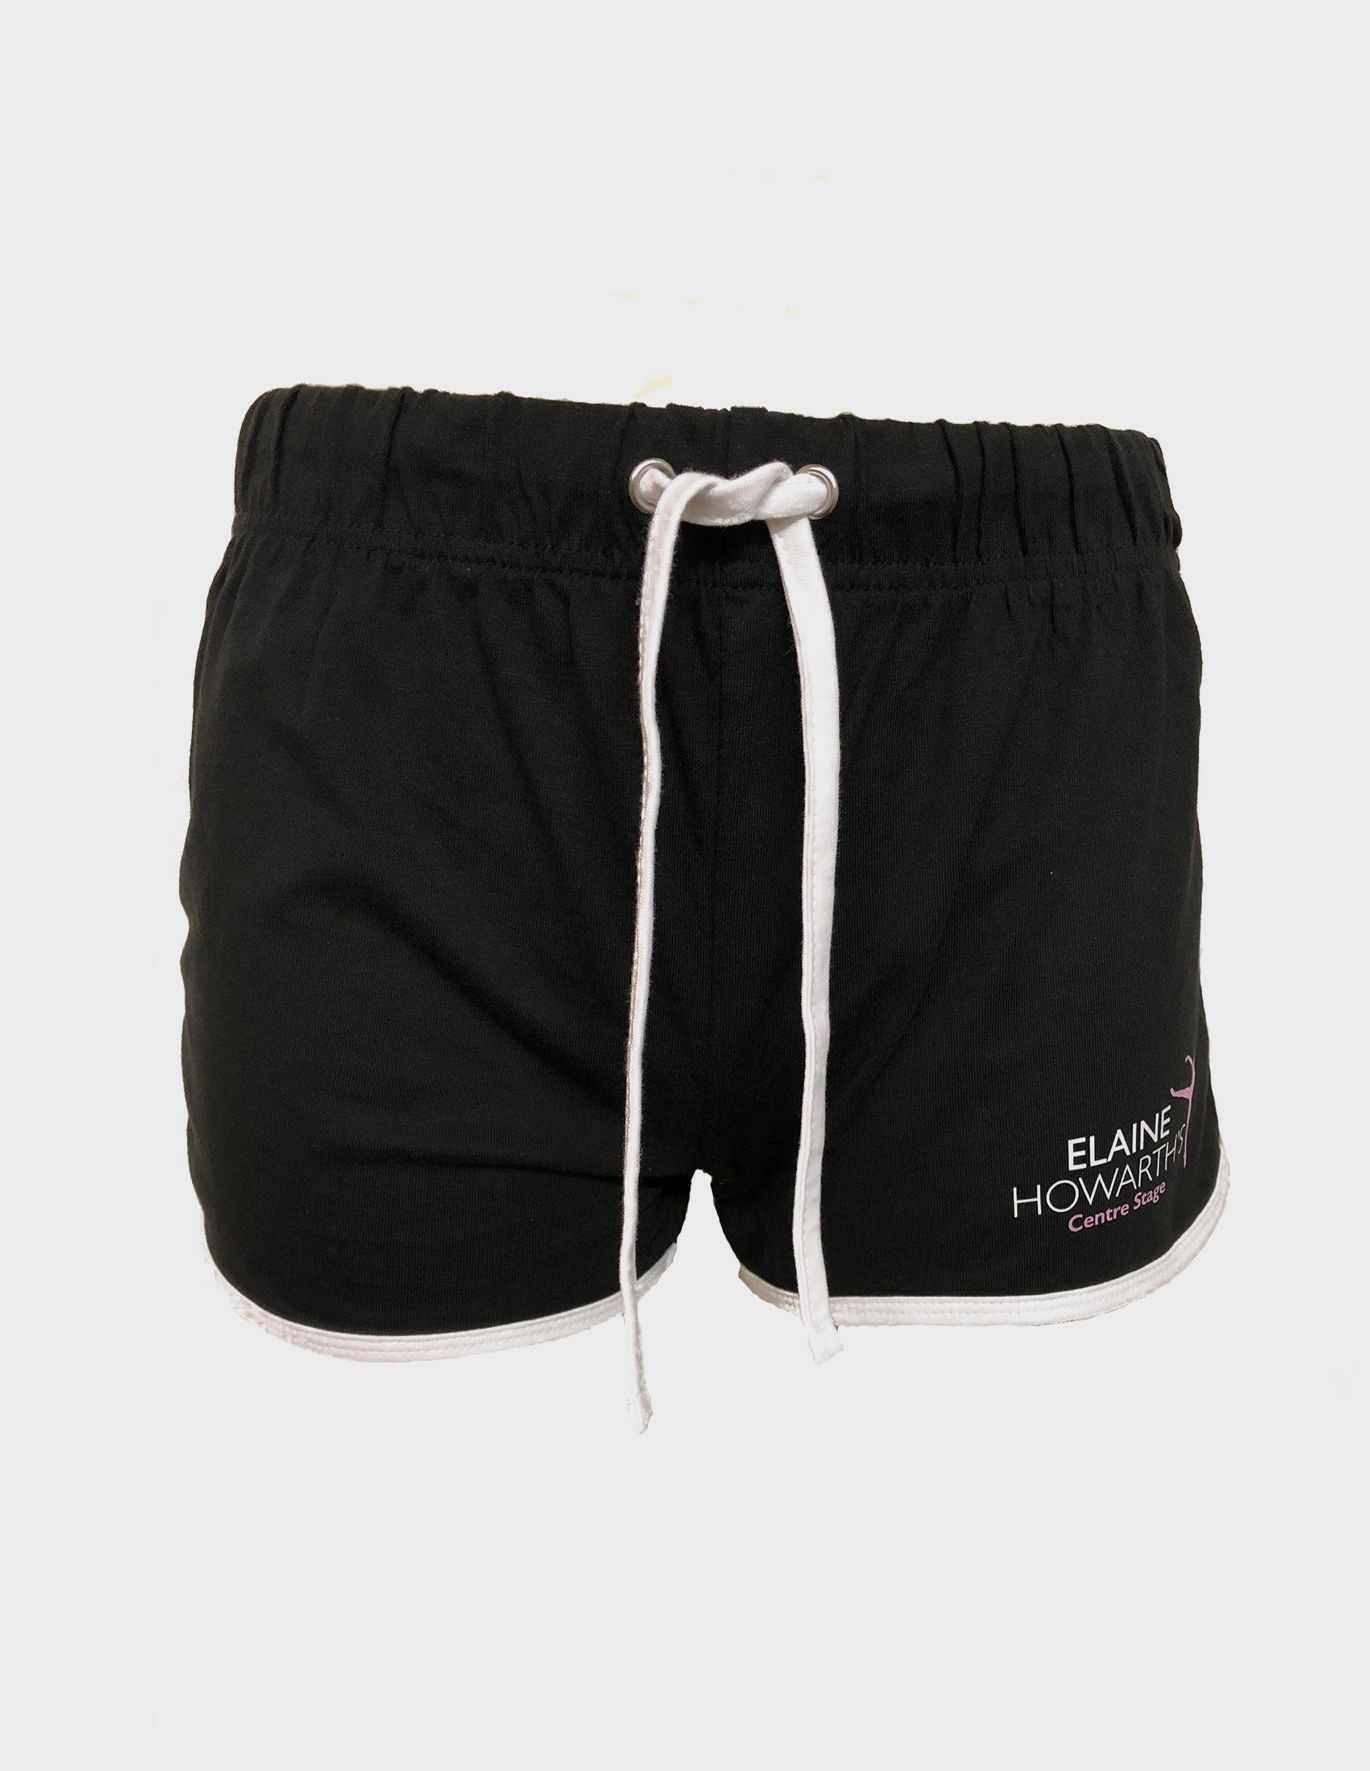 Elaine Howarth's Centre Stage Retro Dance Shorts for Girls